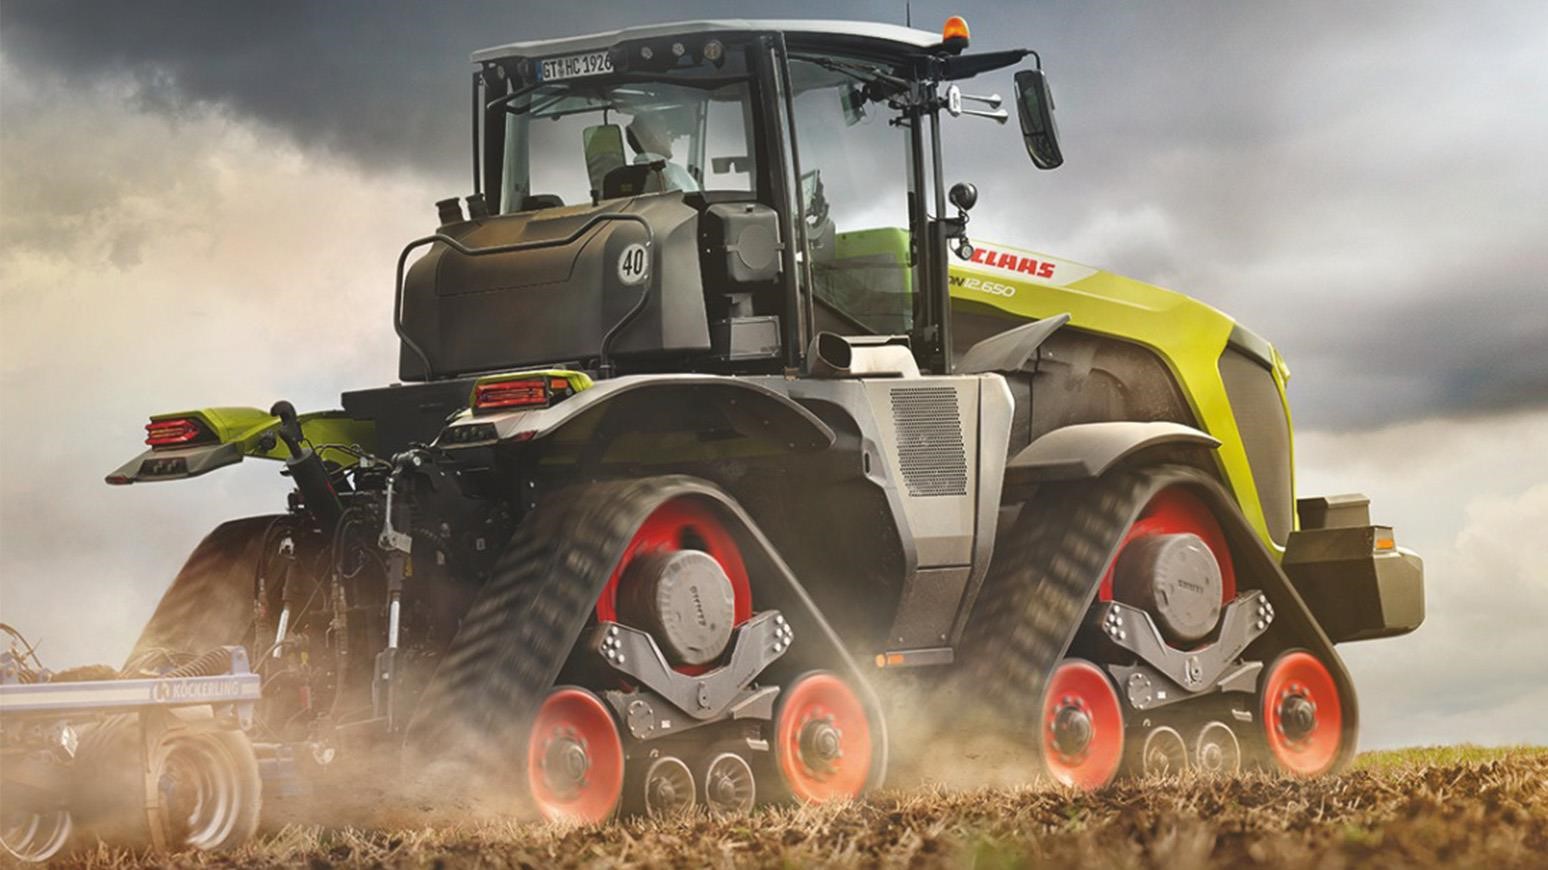 SAME Deutz-Fahr introduces CNG powered tractor at Agritechnica